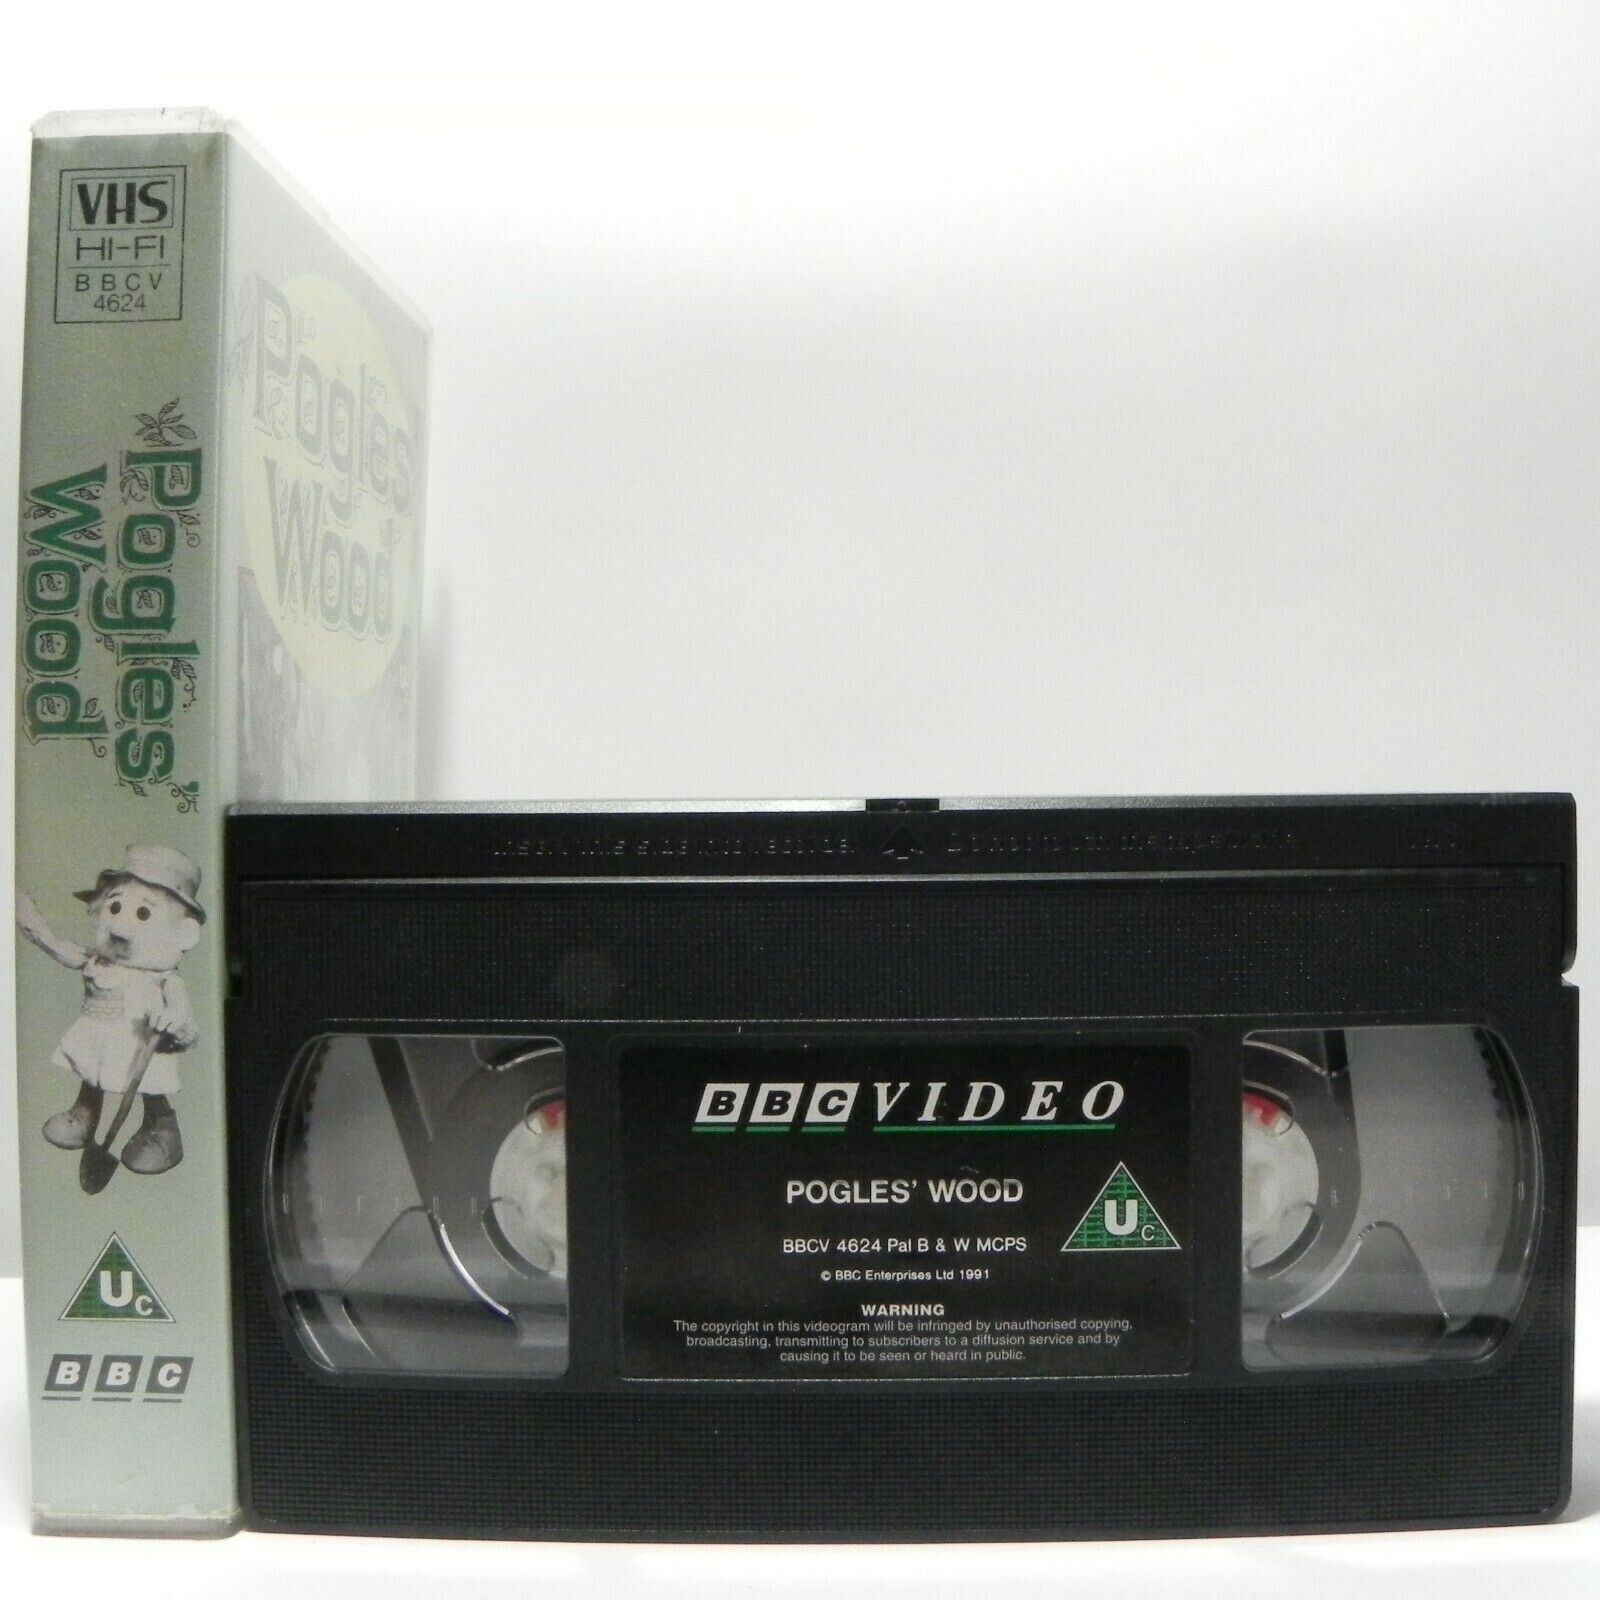 Pogless Wood: 4 Stories - By Olivier Postgate - Animated - Children's - Pal VHS-